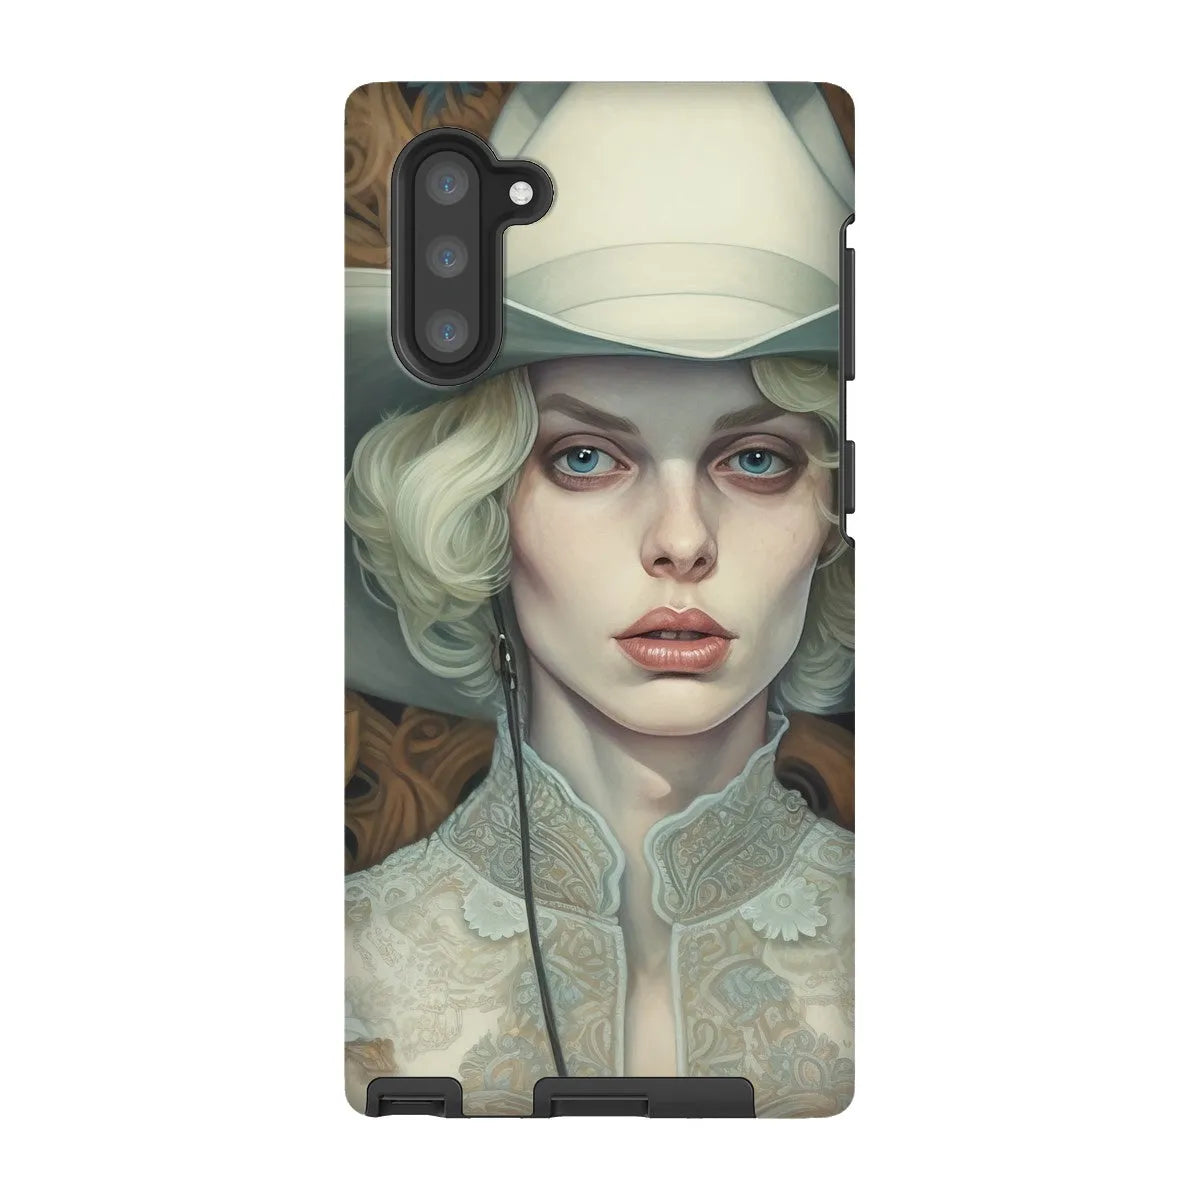 Winnie The Lesbian Cowgirl - Sapphic Art Phone Case - Samsung Galaxy Note 10 / Matte - Mobile Phone Cases - Aesthetic